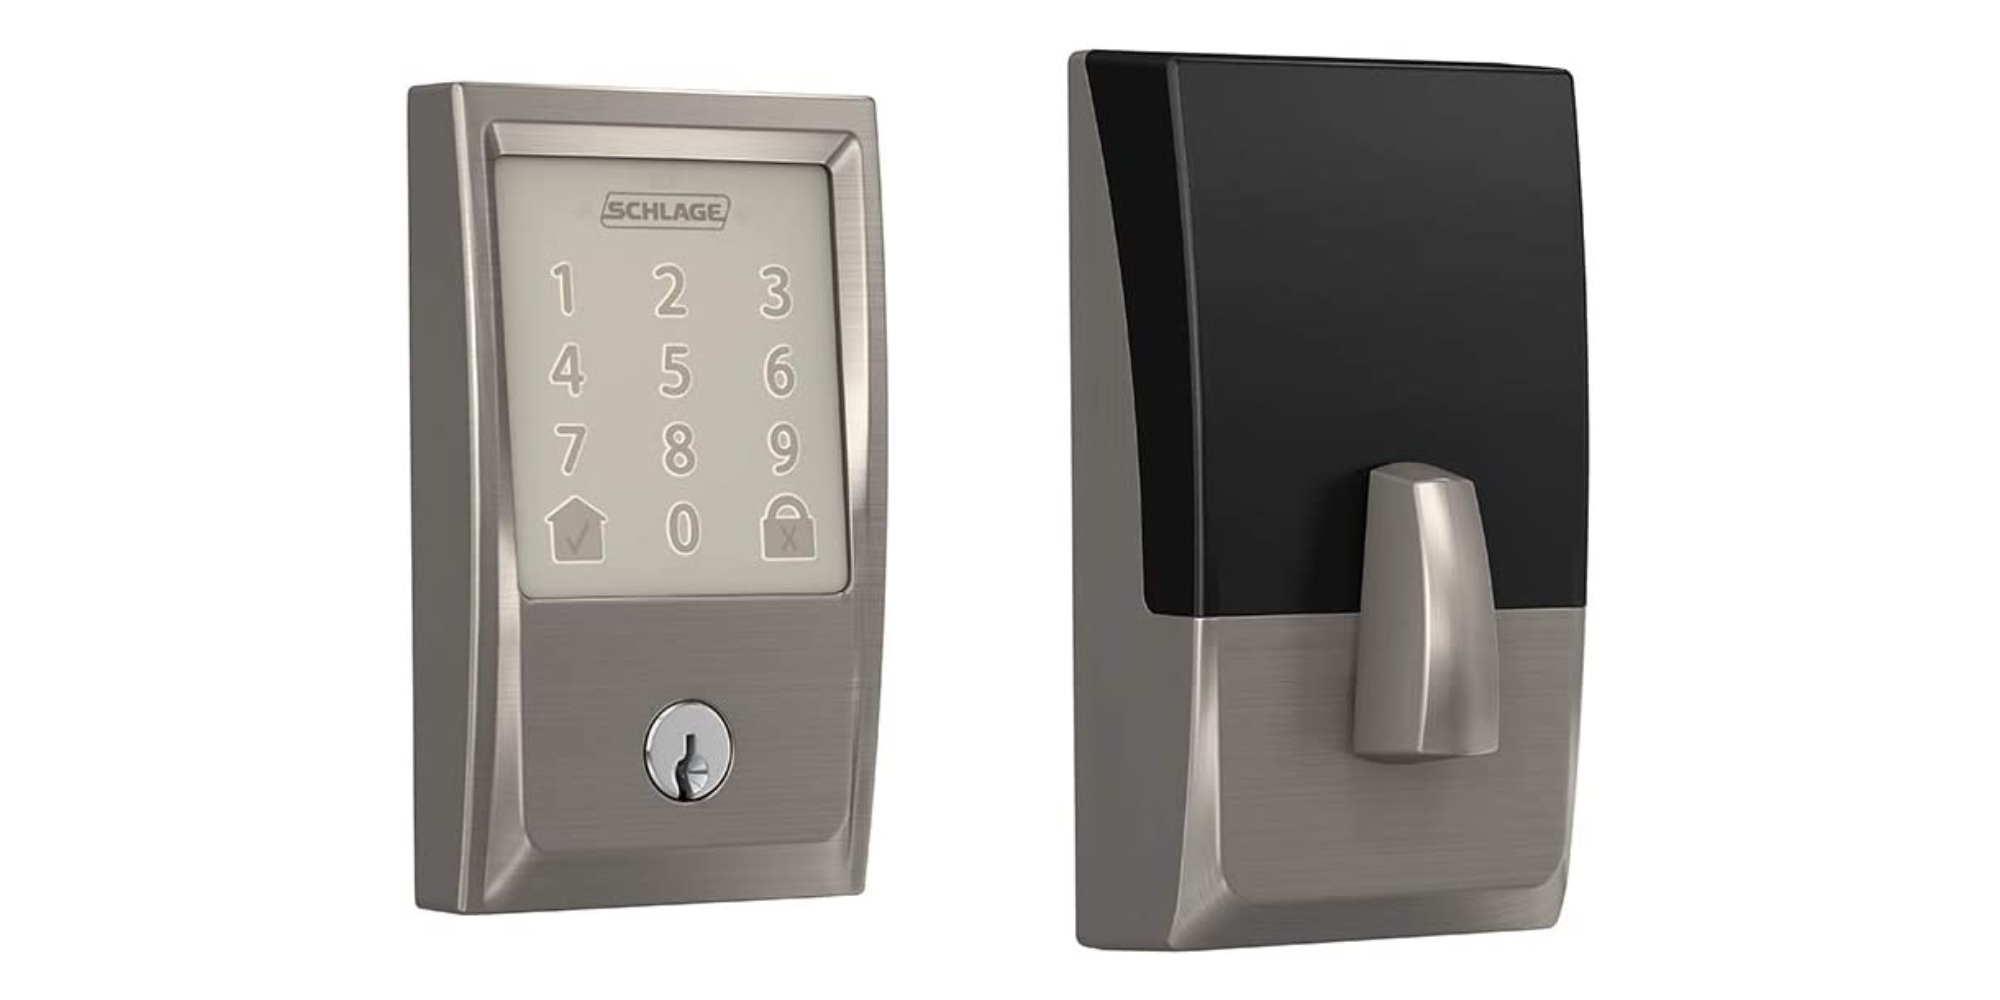 Schlage Encode Smart Lock packs Alexa or Assistant control at $204